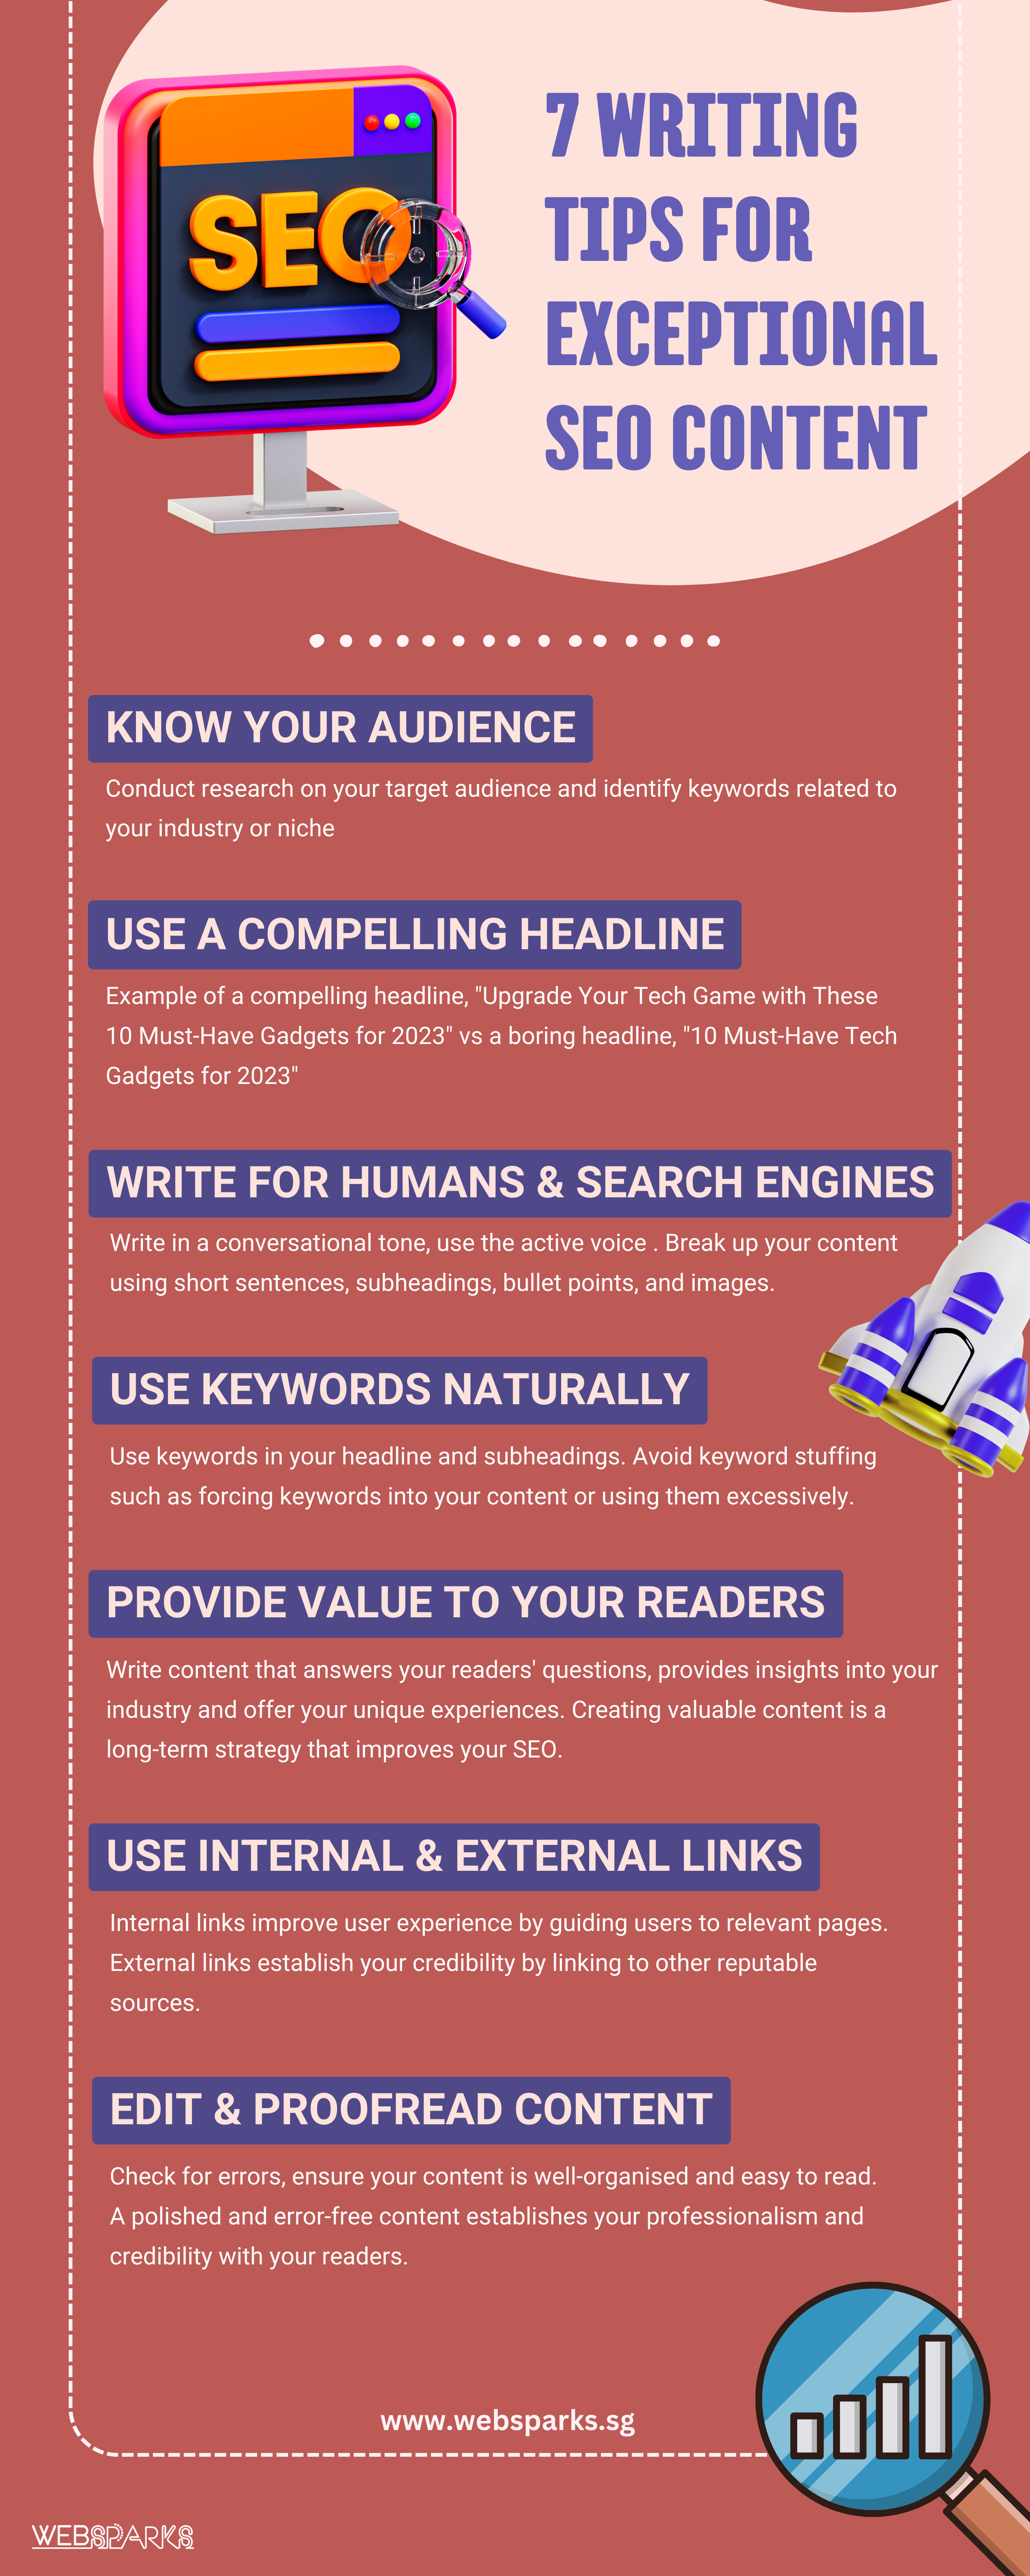 infographic on writing tips for crafting exceptional SEO content